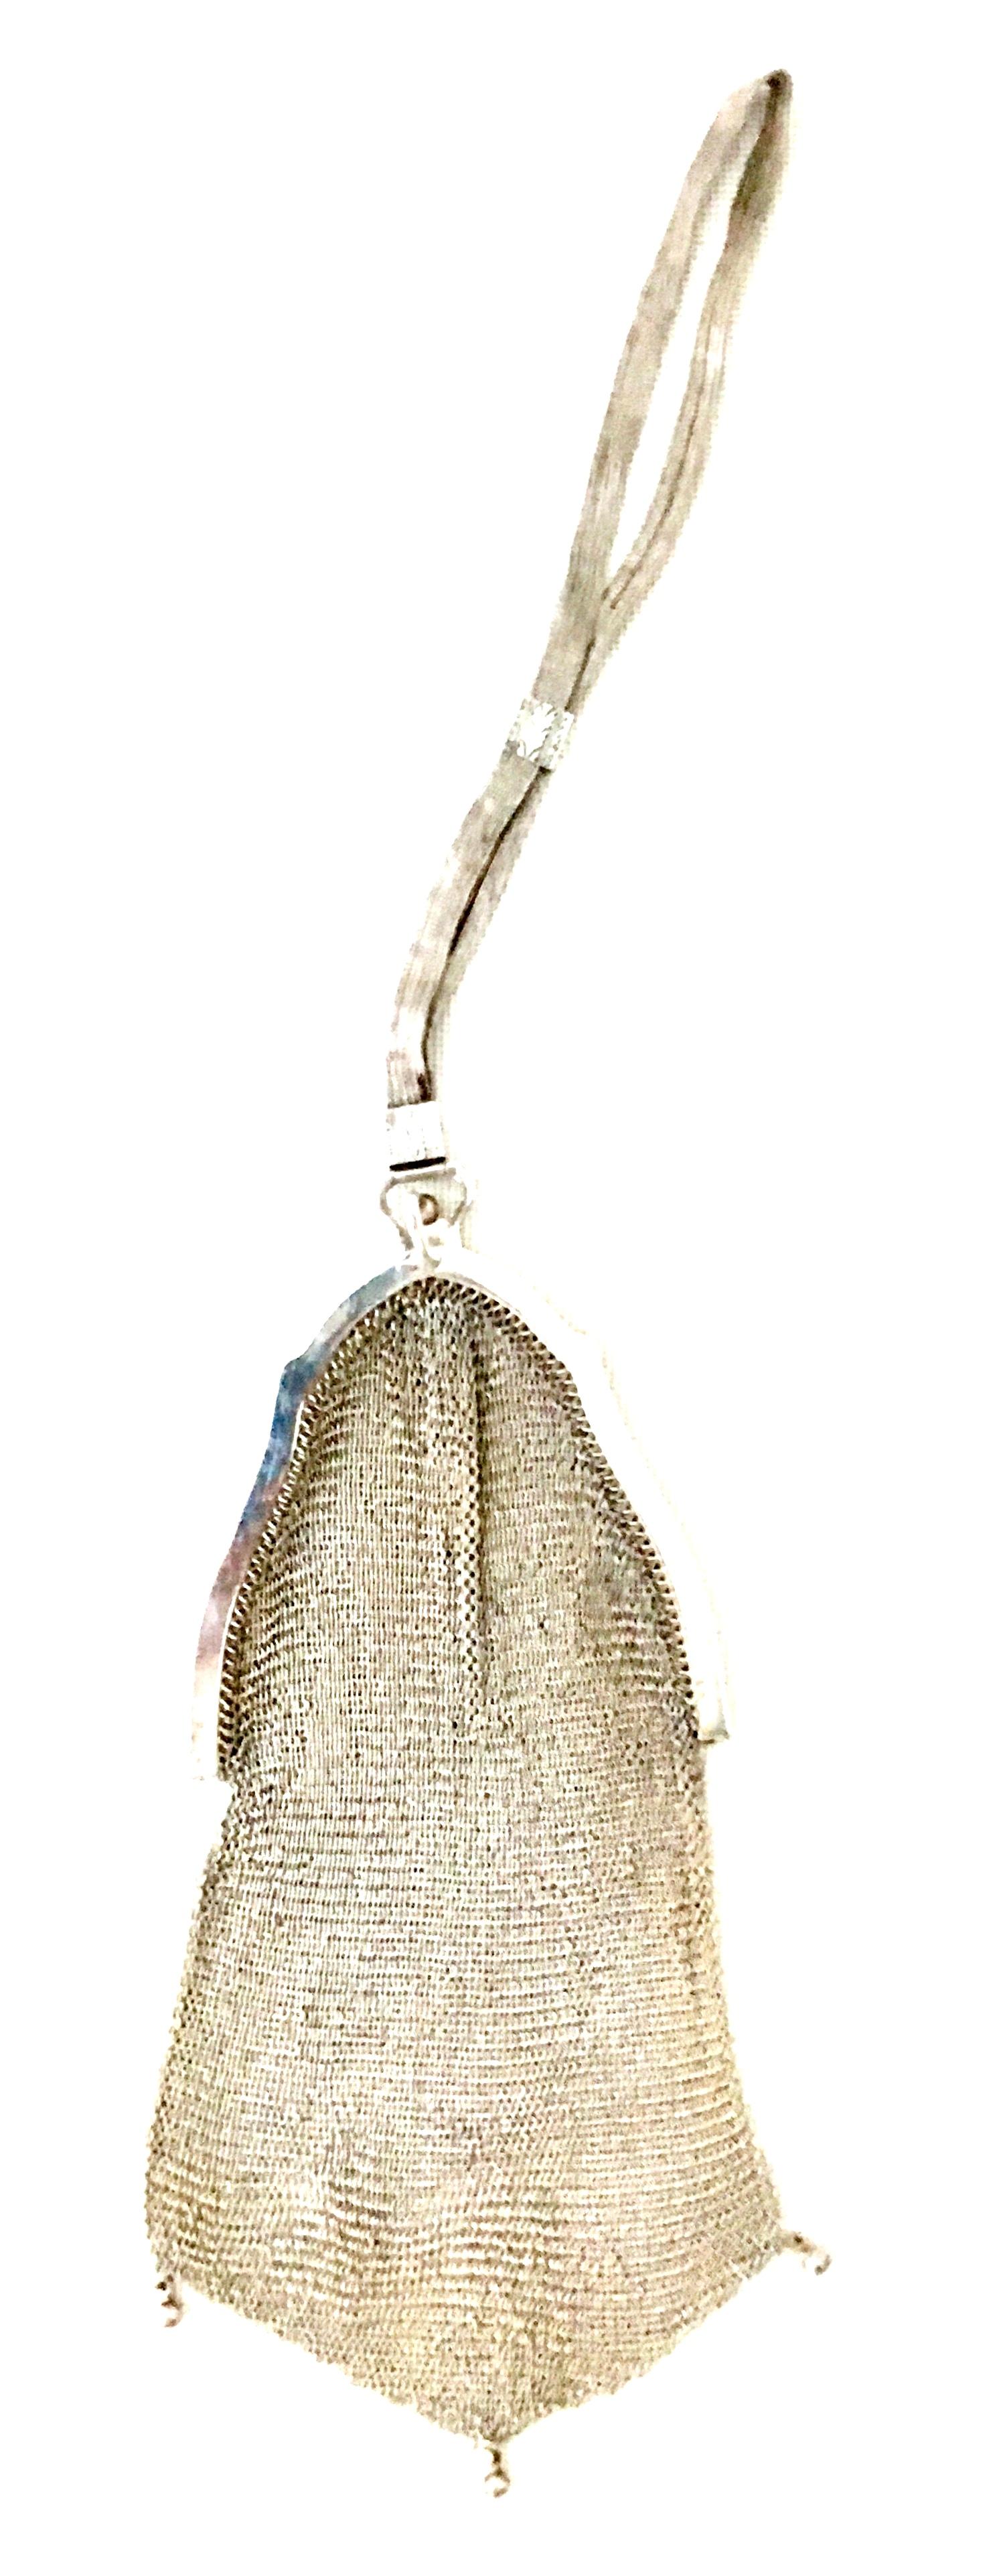 Antique Whiting & Davis Sterling Silver Soldered Ring Mesh Flapper Wristlet Style Hand Bag. This rare Art Nouveau evening bag features, sterling silver ring style soldered mesh, etched Art Nouveau motif frame with snap through closure. The 